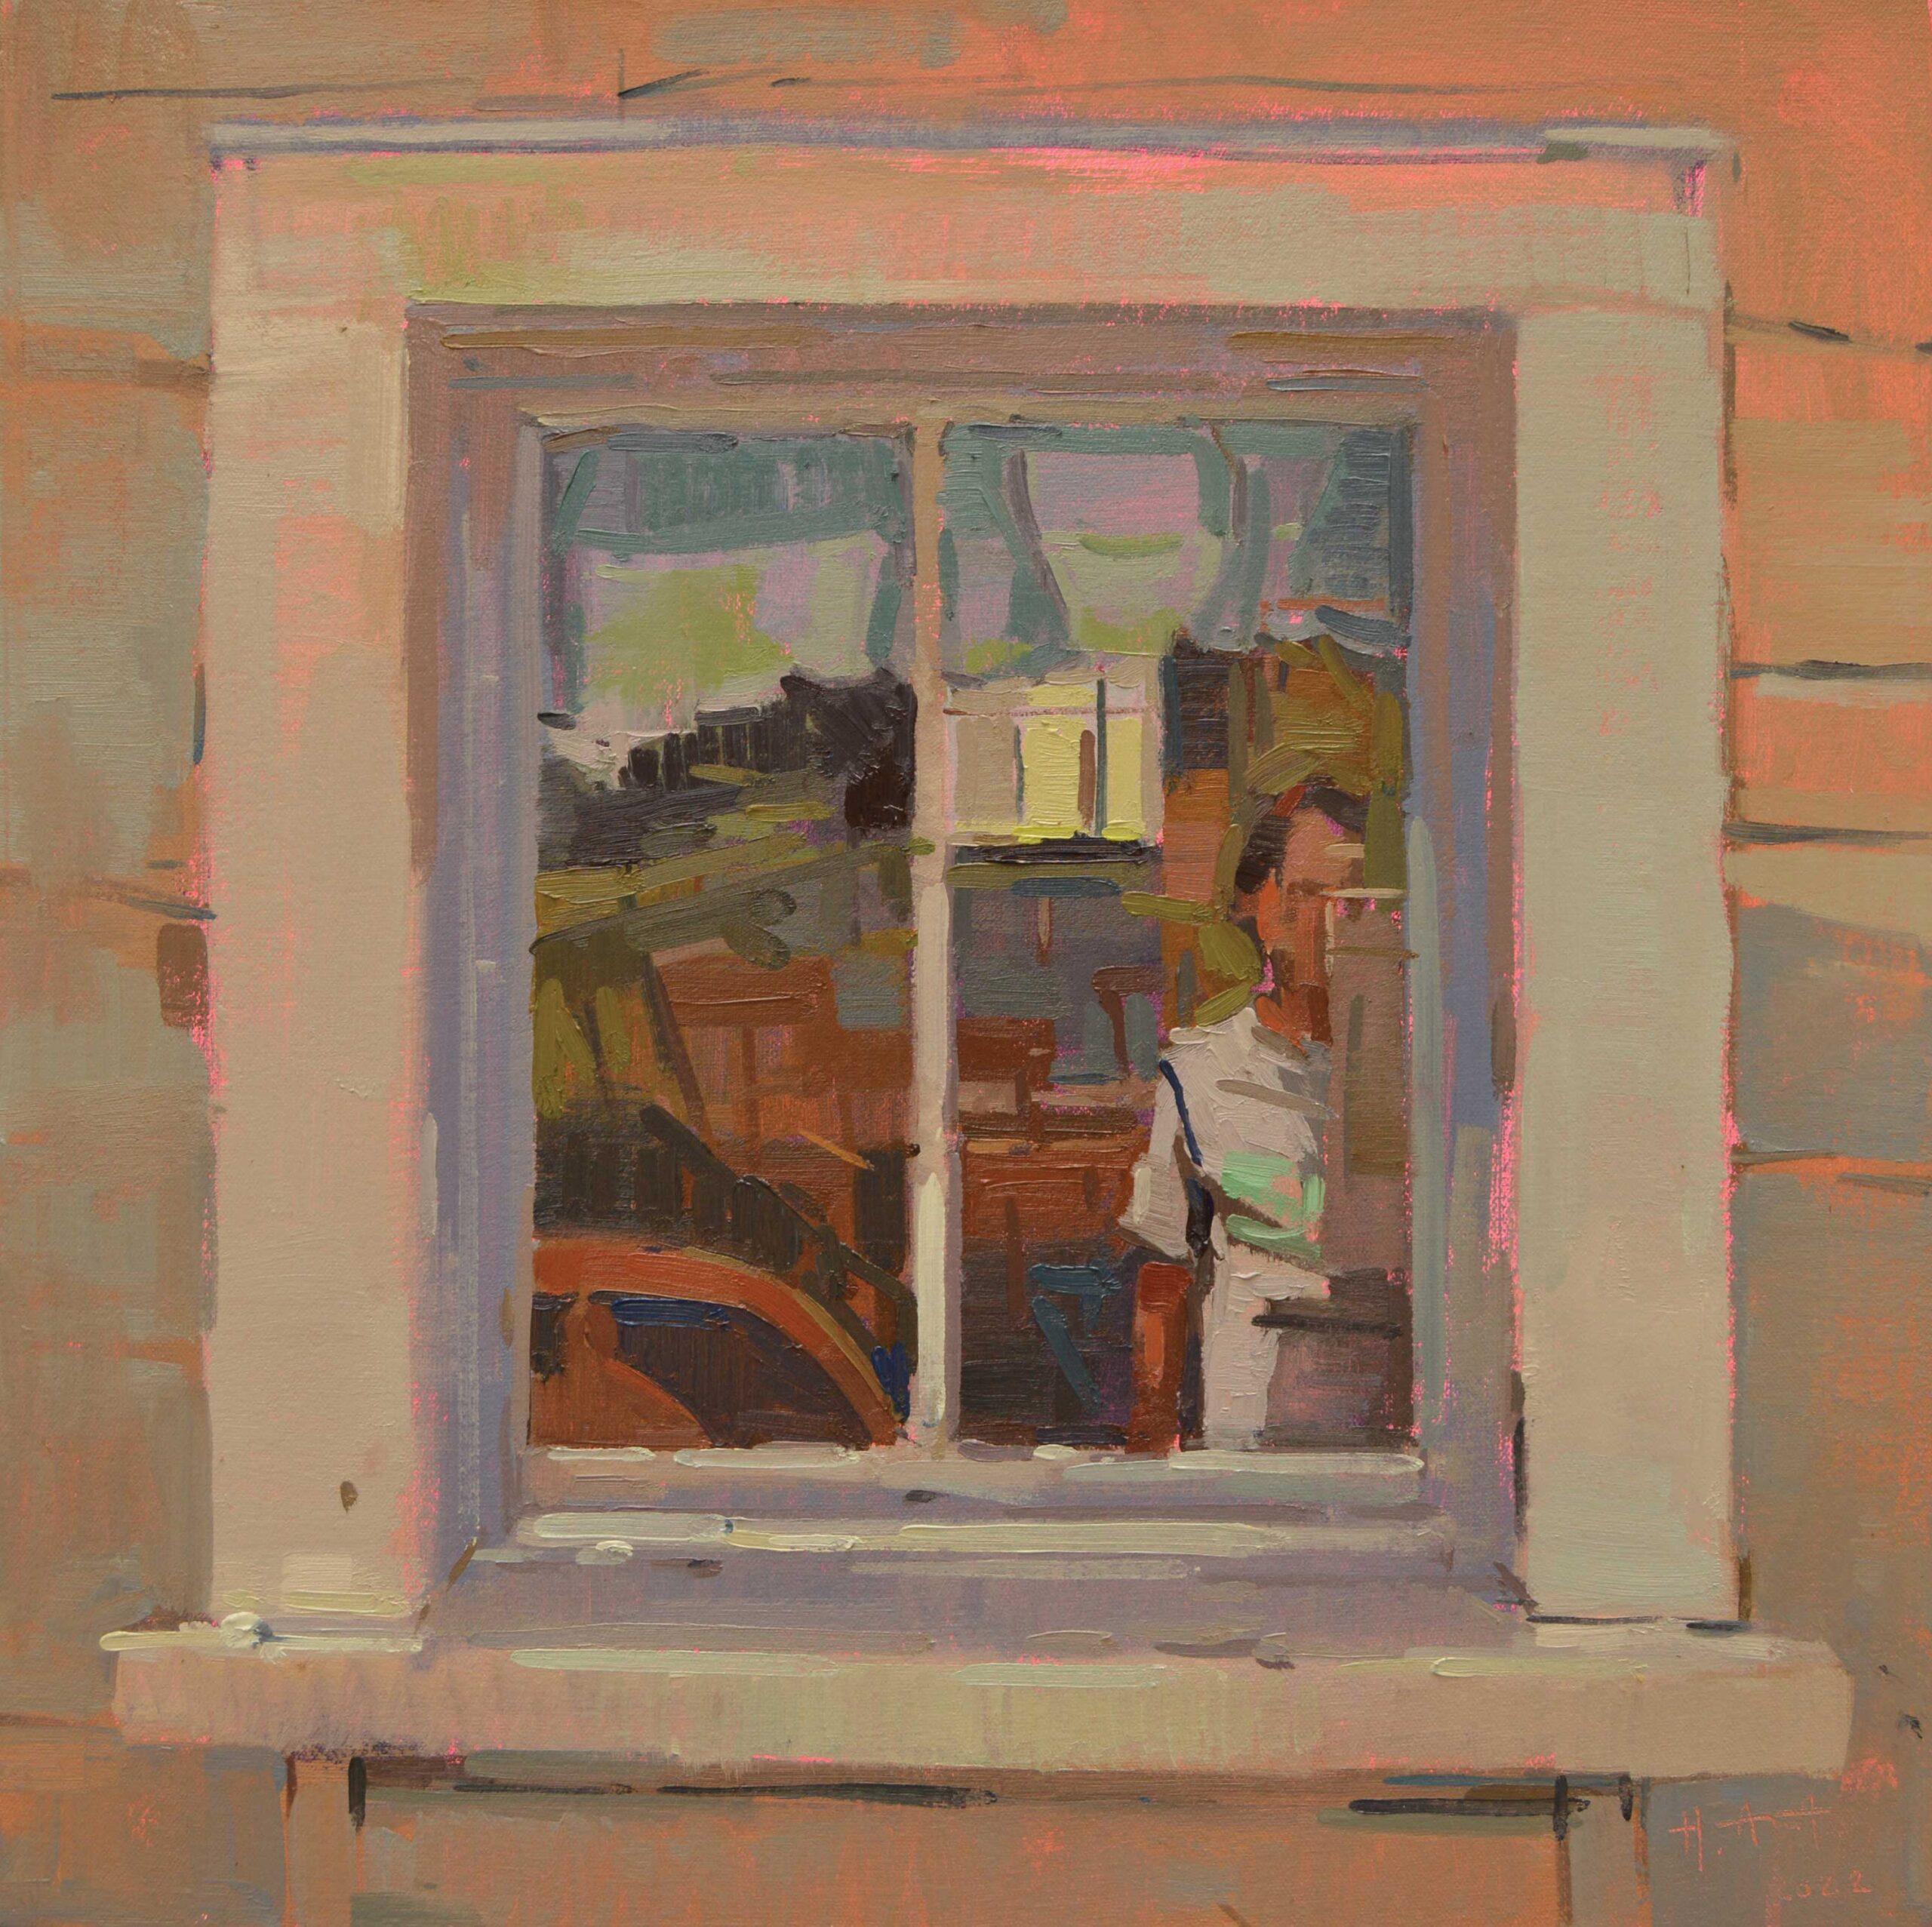 Hector Arcuna, "Corner of the Past," 2022, oil, 18 x 18 in., available from Pink Llama Gallery, plein air